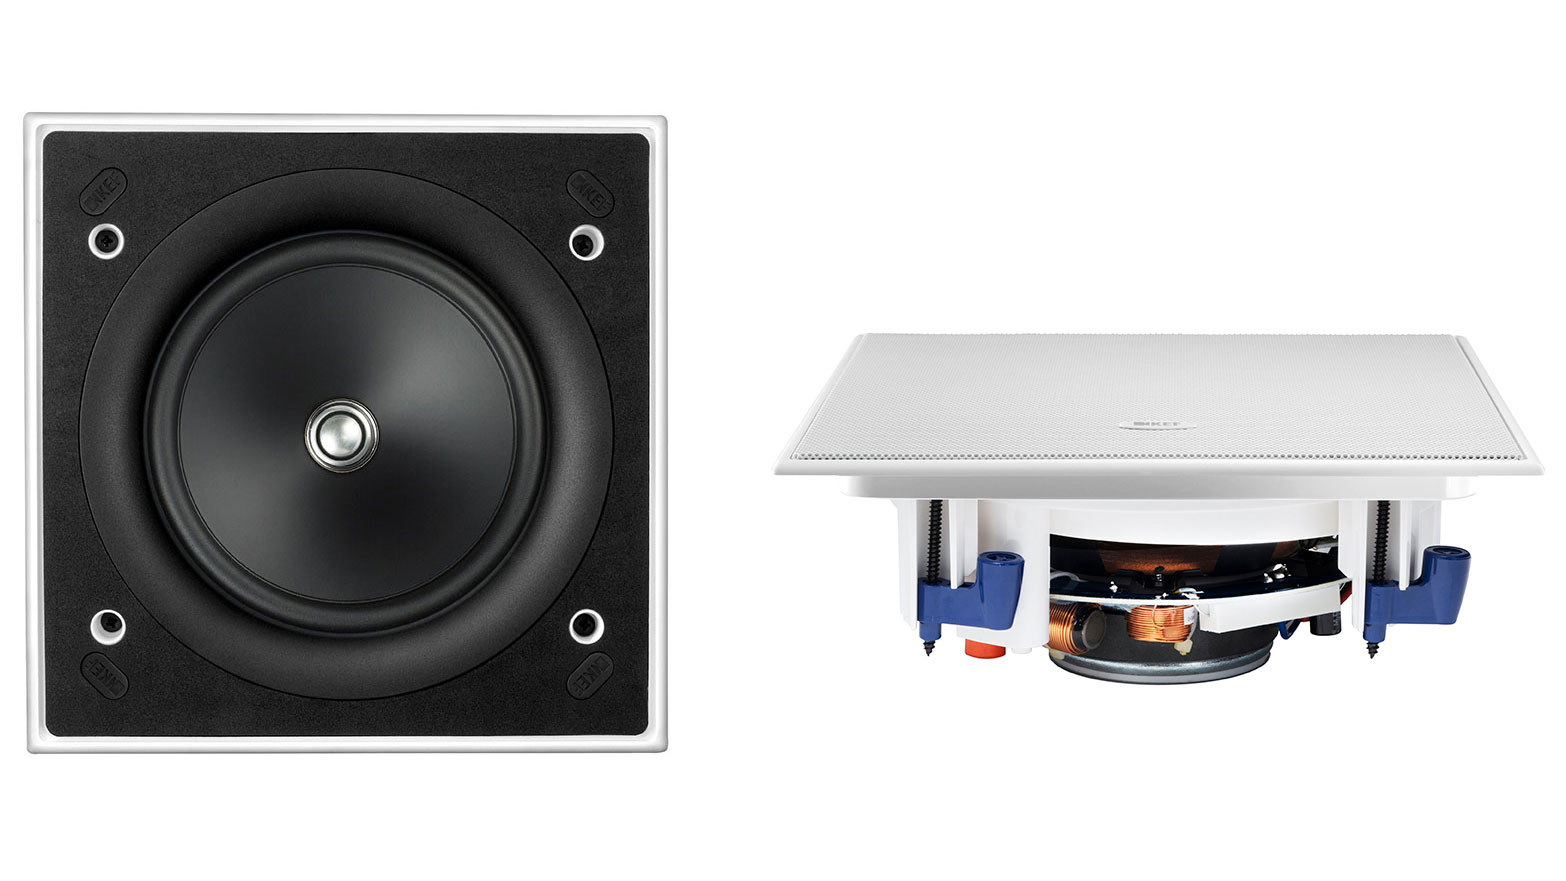 The KEF Ci260ES without and with cover (Image Credit: KEF)